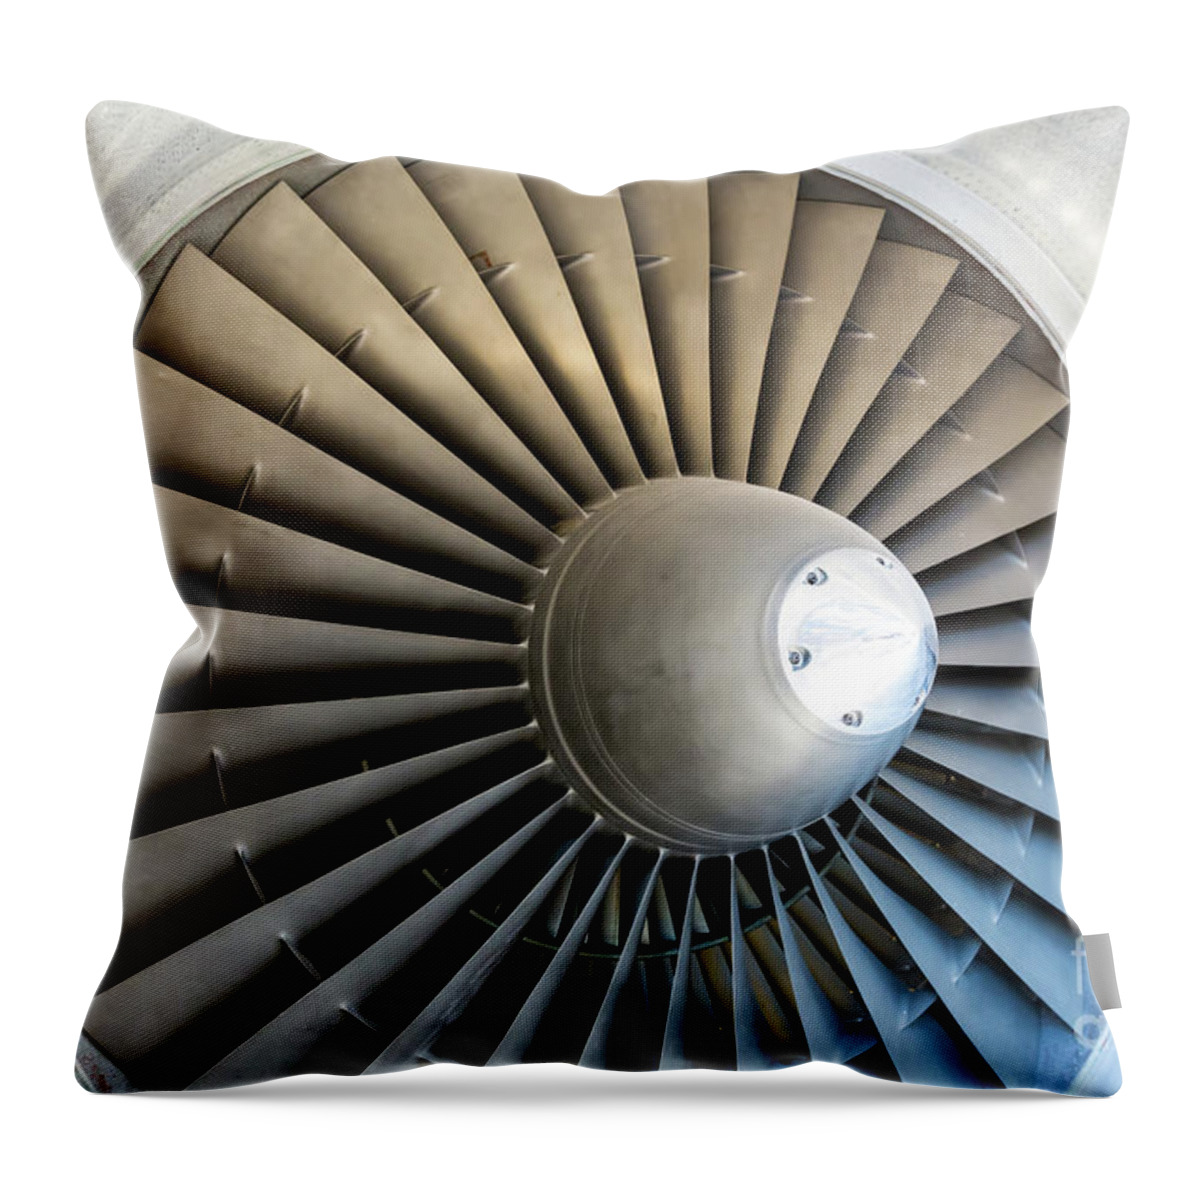 Wind Throw Pillow featuring the photograph Jet Engine Blades Closeup by Nomadsoul1